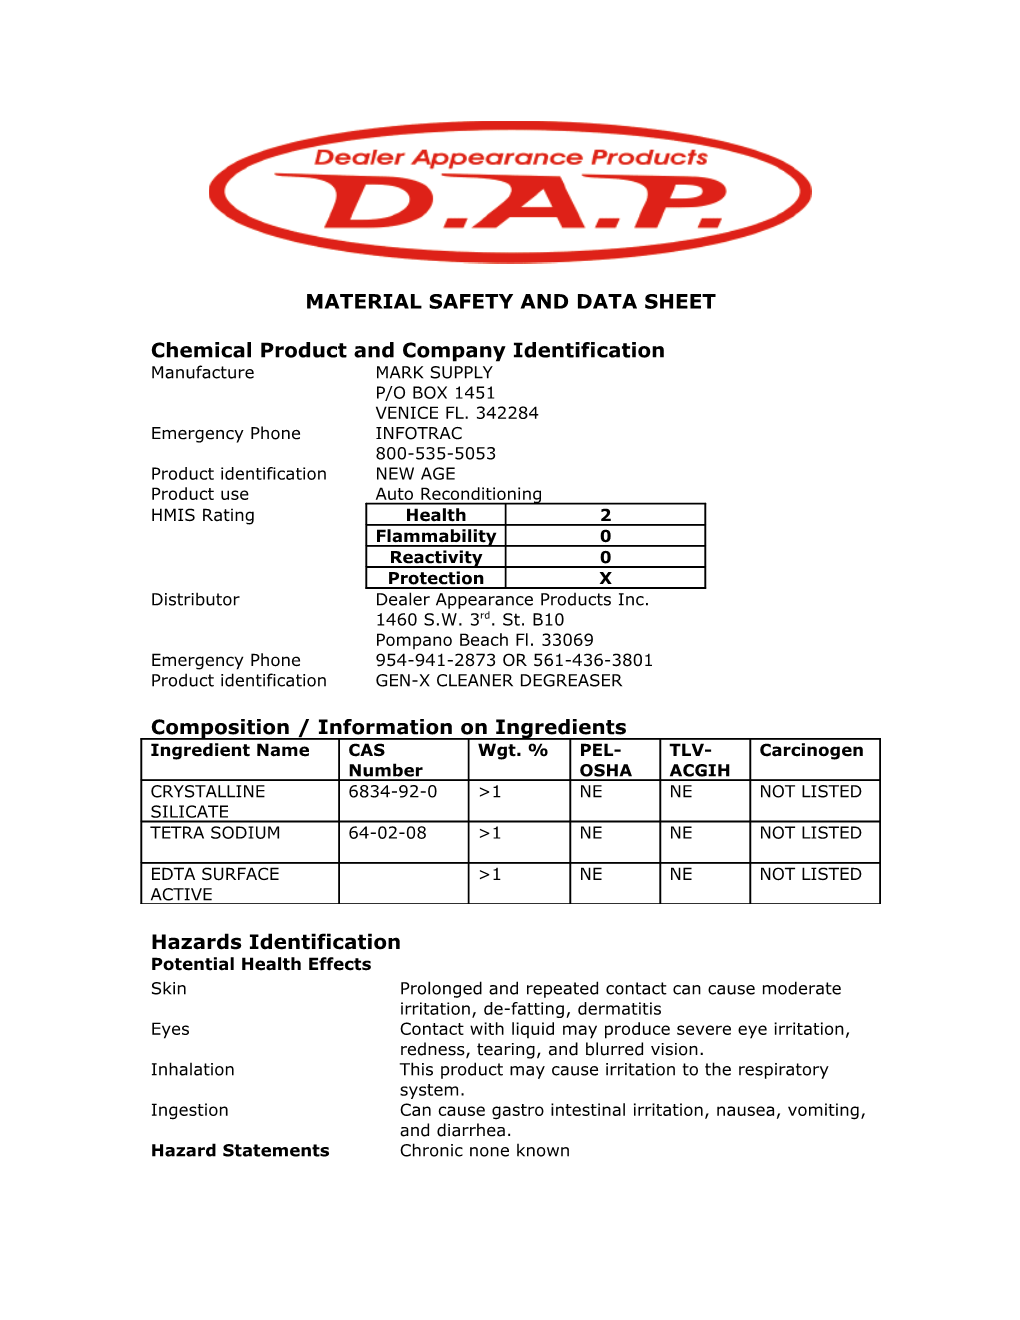 Material Safety and Data Sheet